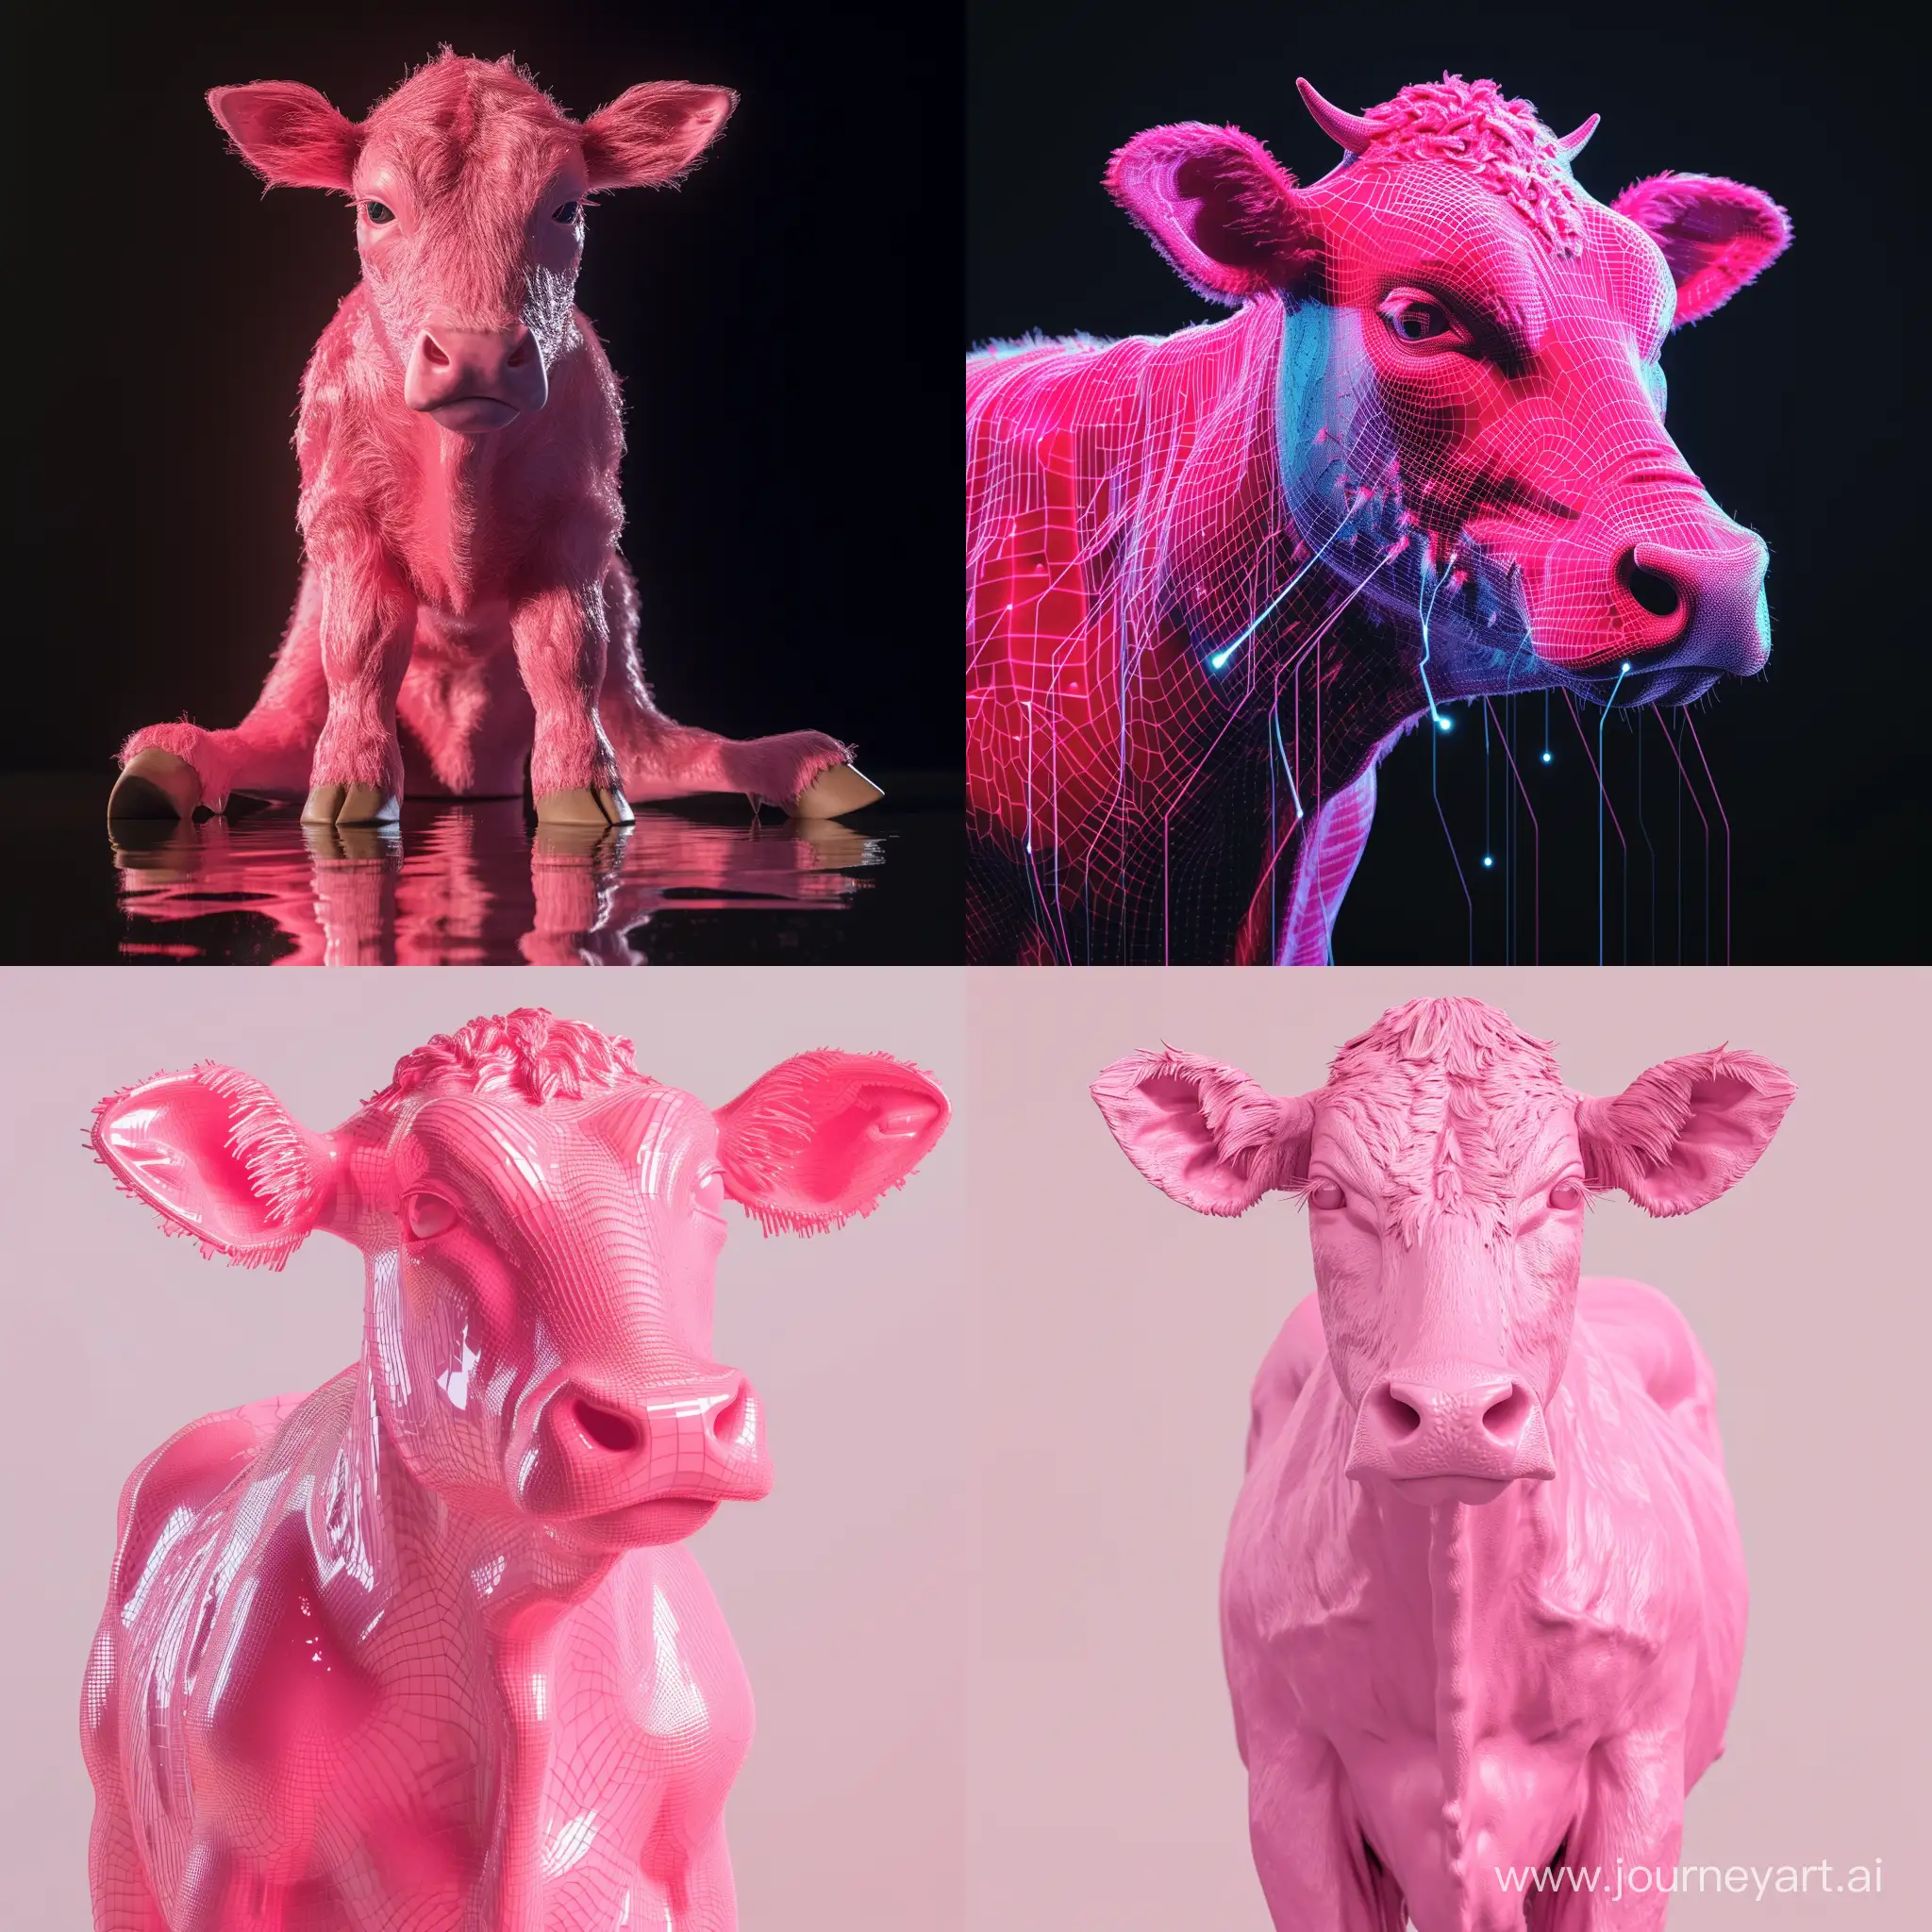 Futuristic-Pink-Cow-in-the-Web3-Tech-World